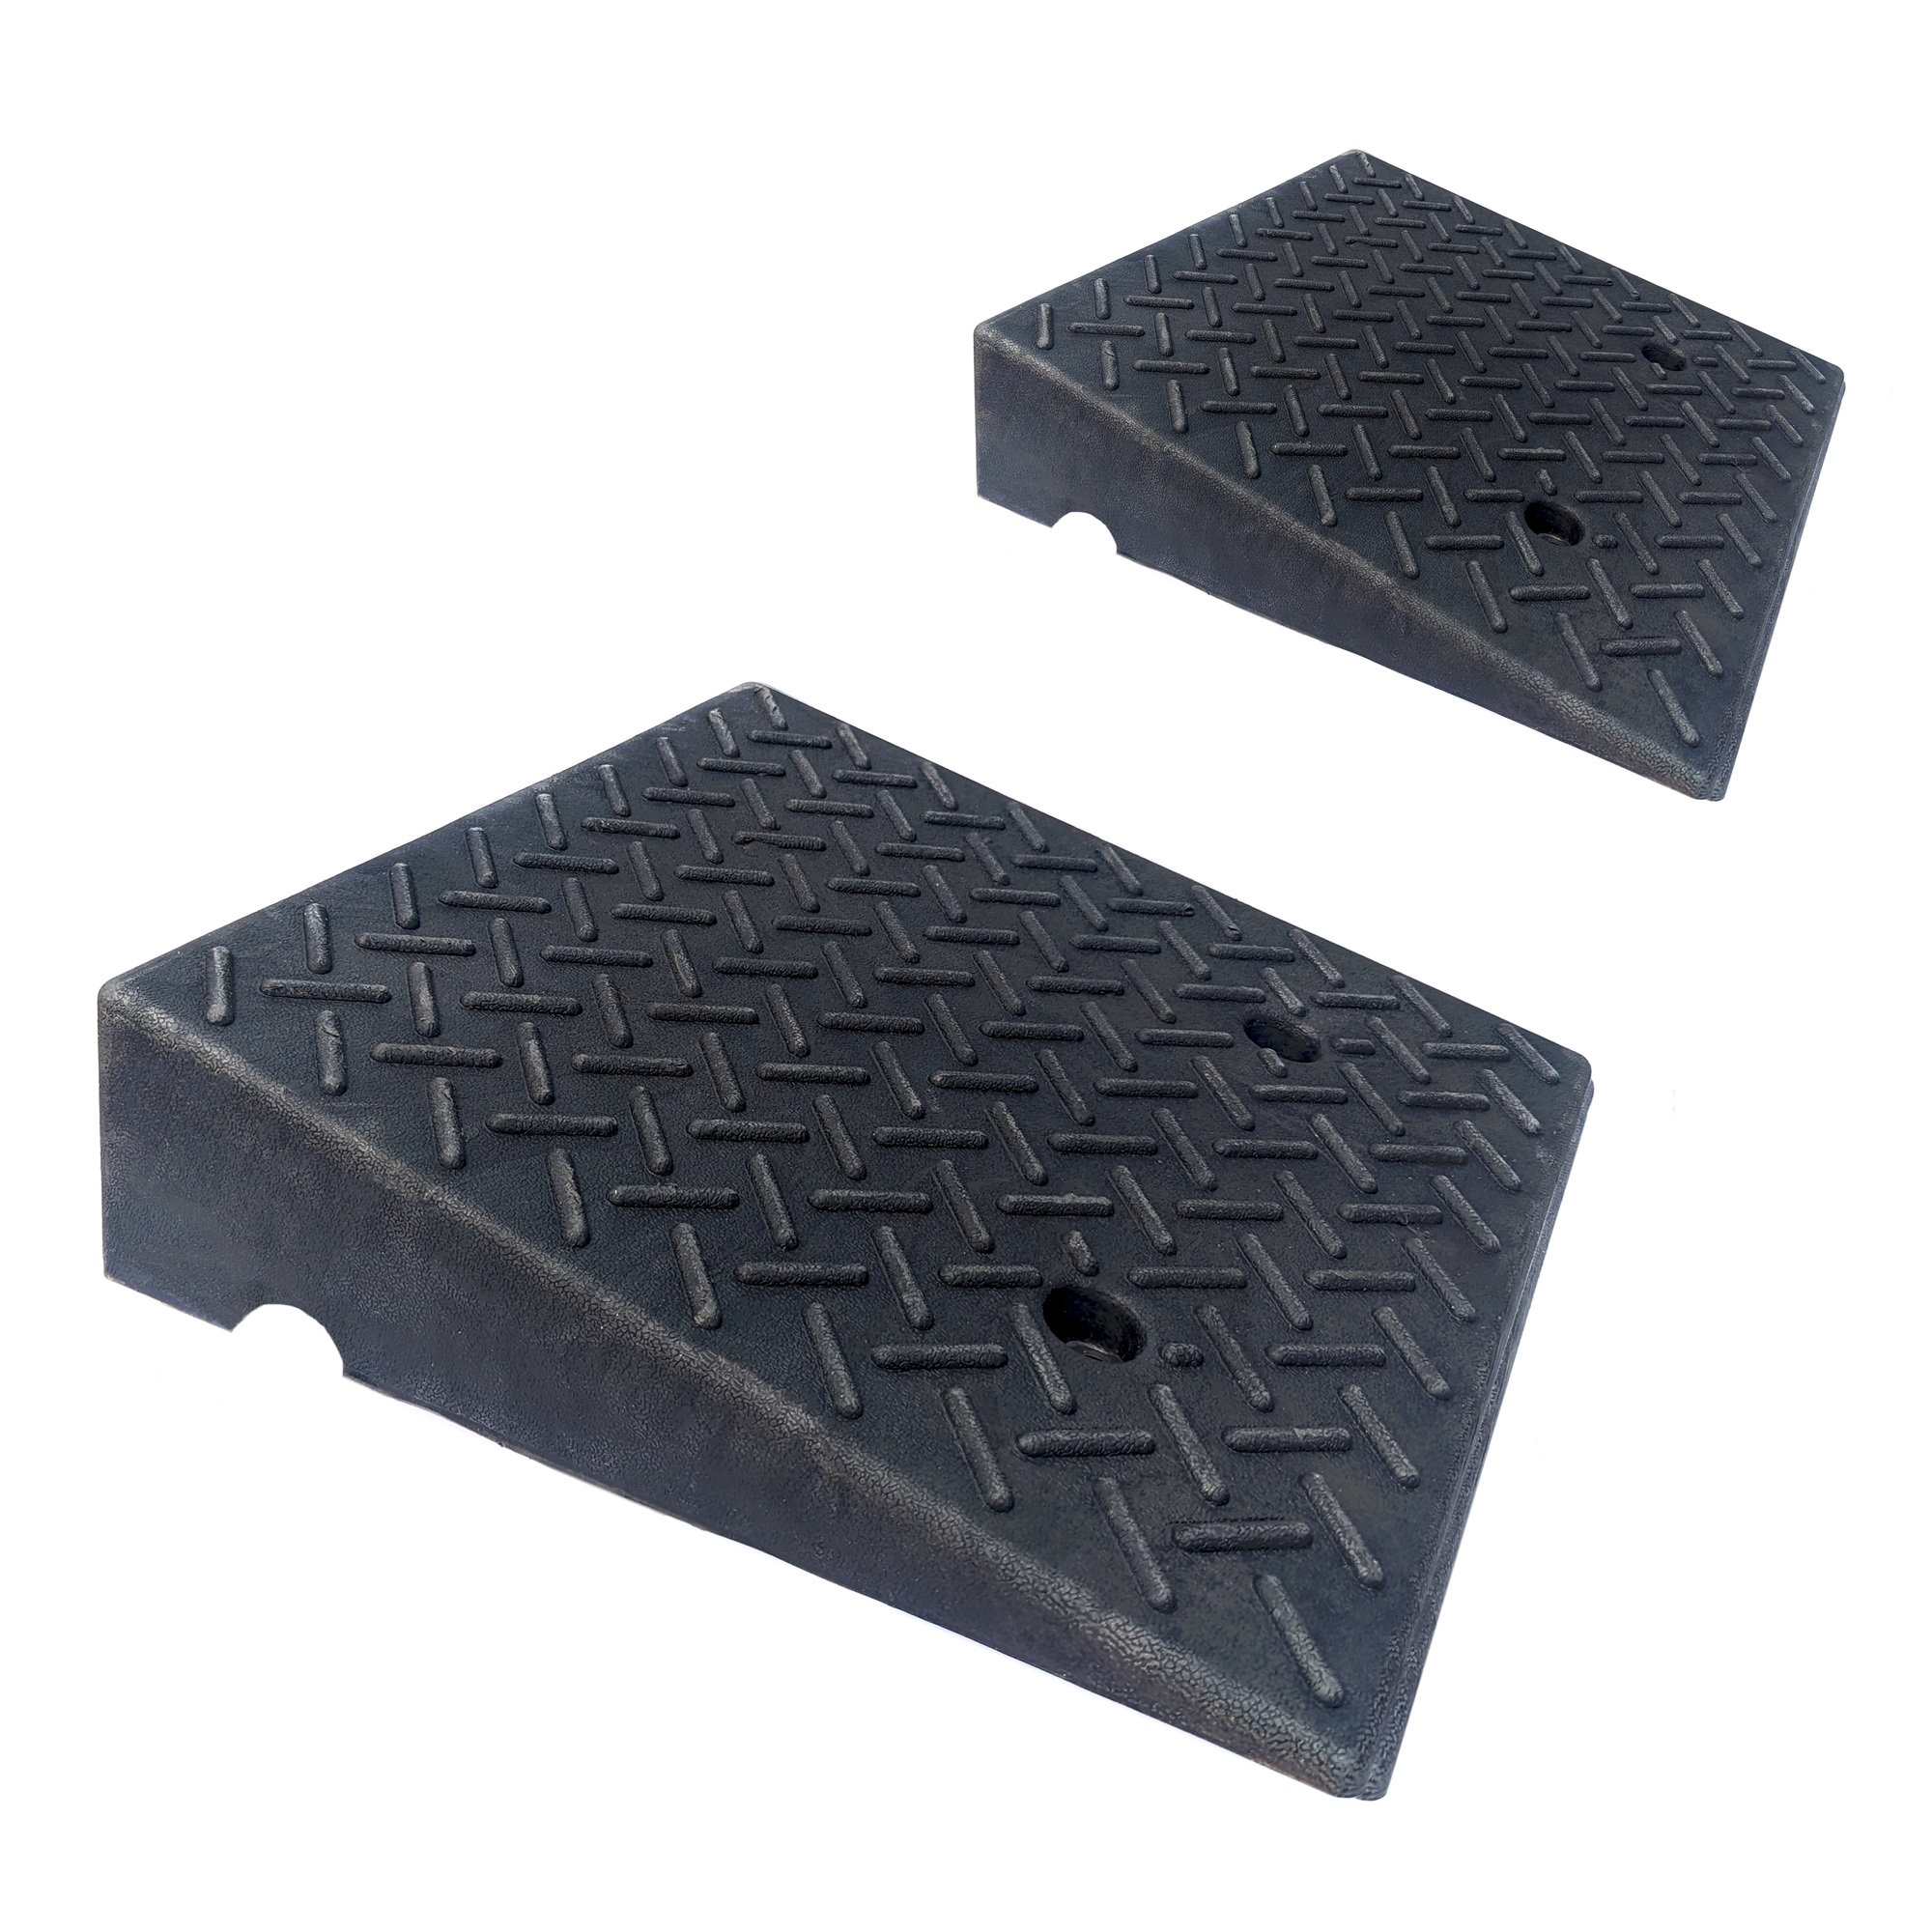 Light Duty Rubber Ramps For Shipping Containers/Sea Cans - 2 Pack